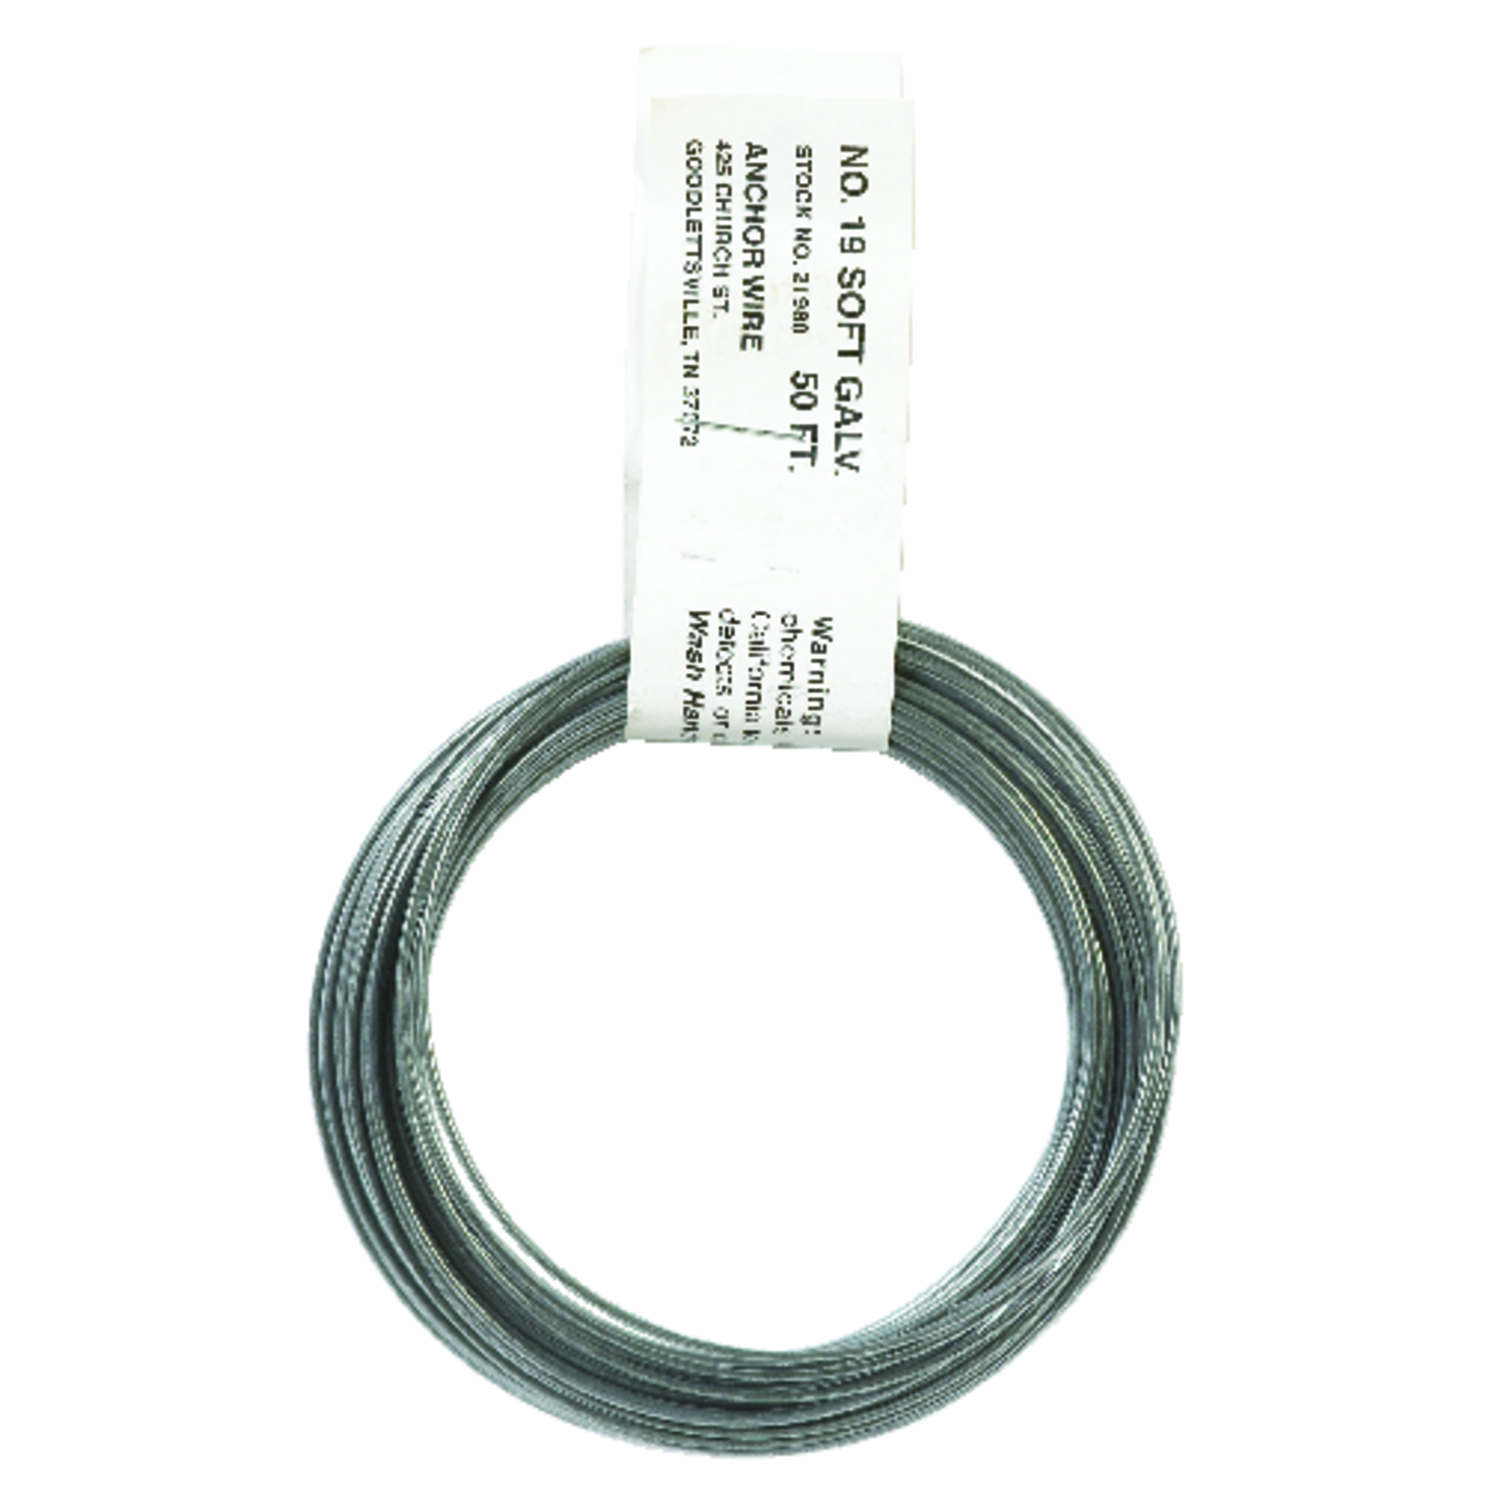 UPC 038902219800 product image for Hillman 50ft Dark Annealed Wire (123179) | upcitemdb.com